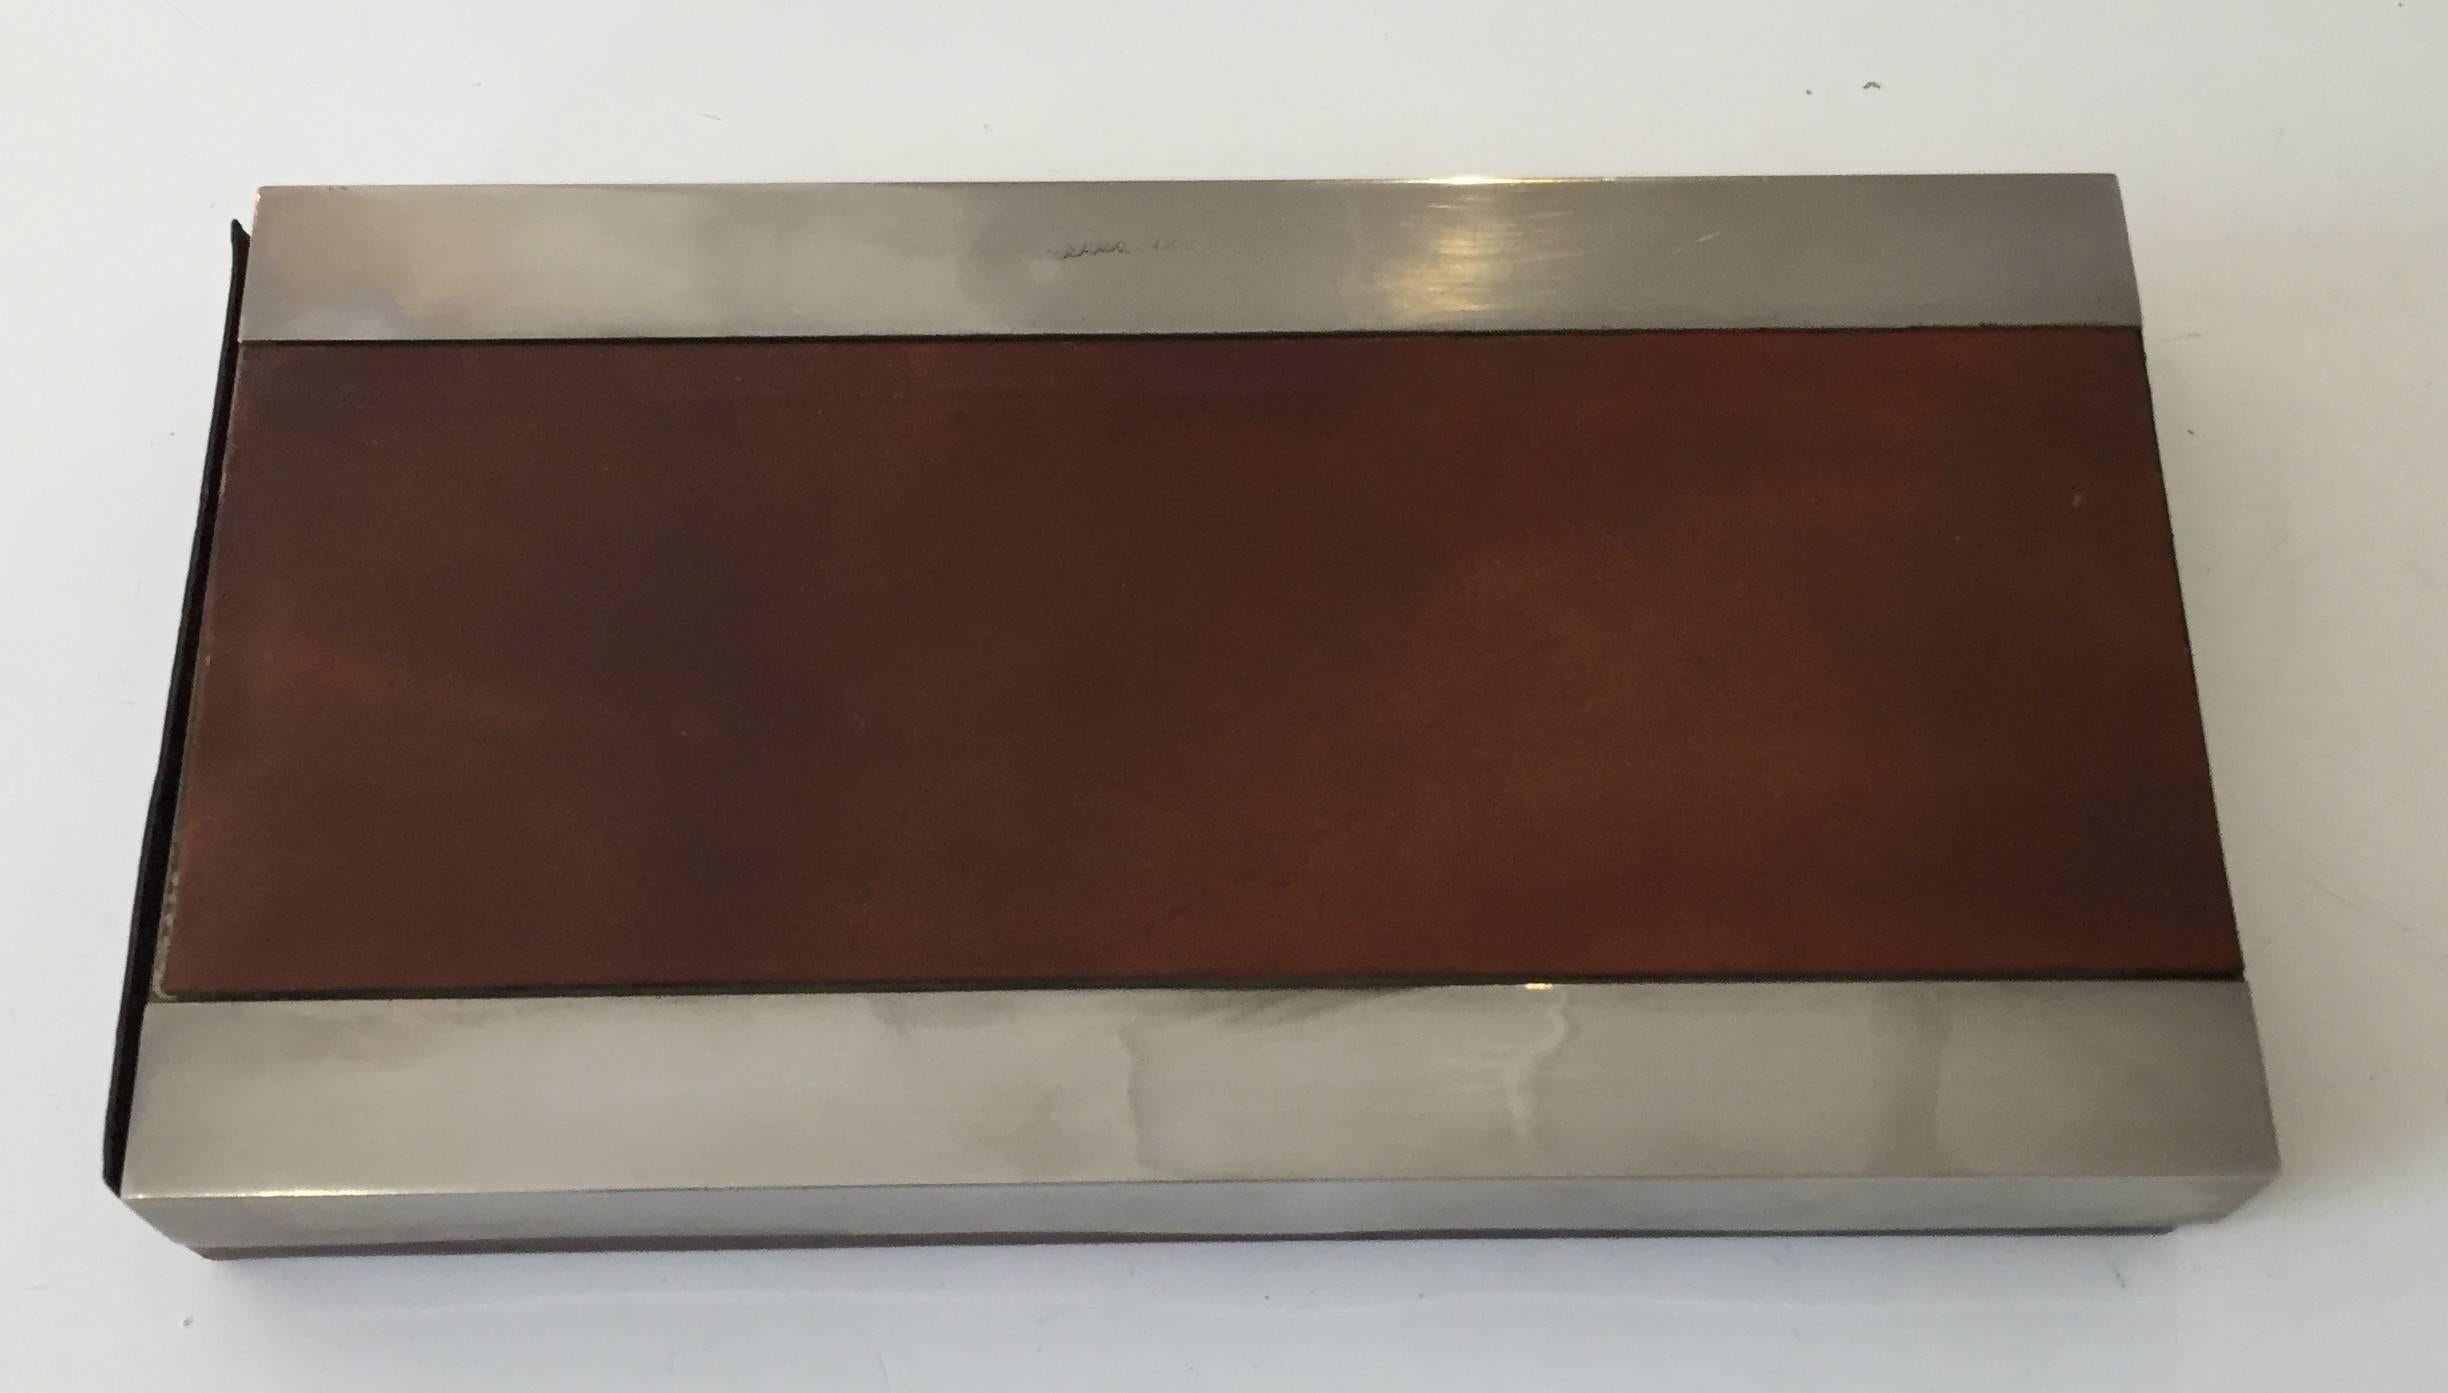 Chic leather box with steel accents. Top slides to reveal interior. Signed.